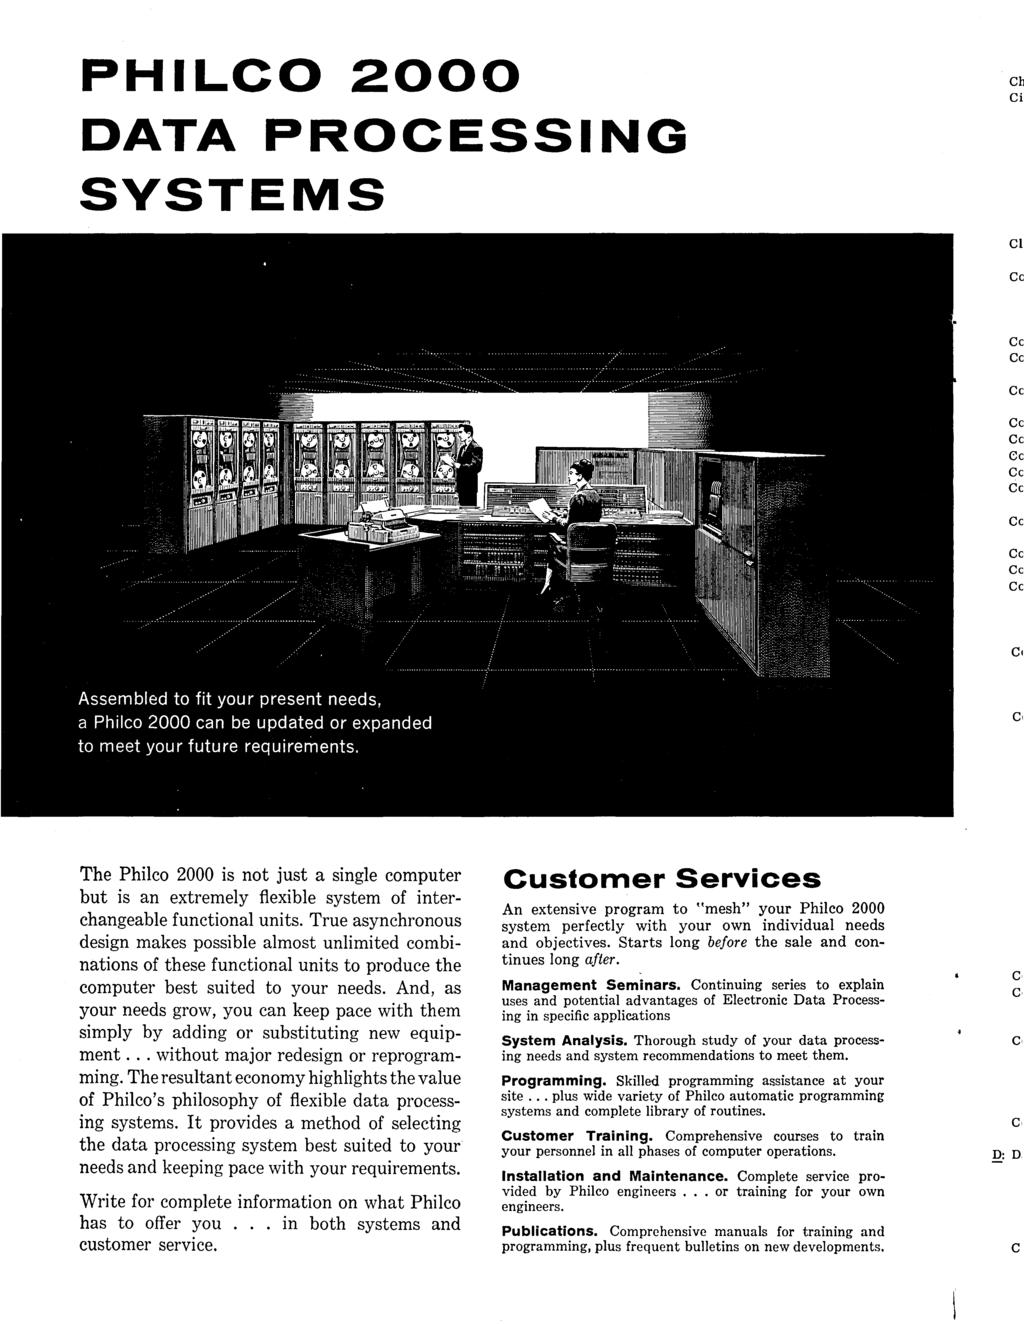 Cc Cc Cc Cc Cc cc ec Cc cc Cc Cc Cc PHILCO 2000 DATA PROCESSING SYSTEMS Ch Ci Cl Cc The Phil co 2000 is not just a single computer but is an extremely flexible system of interchangeable functional